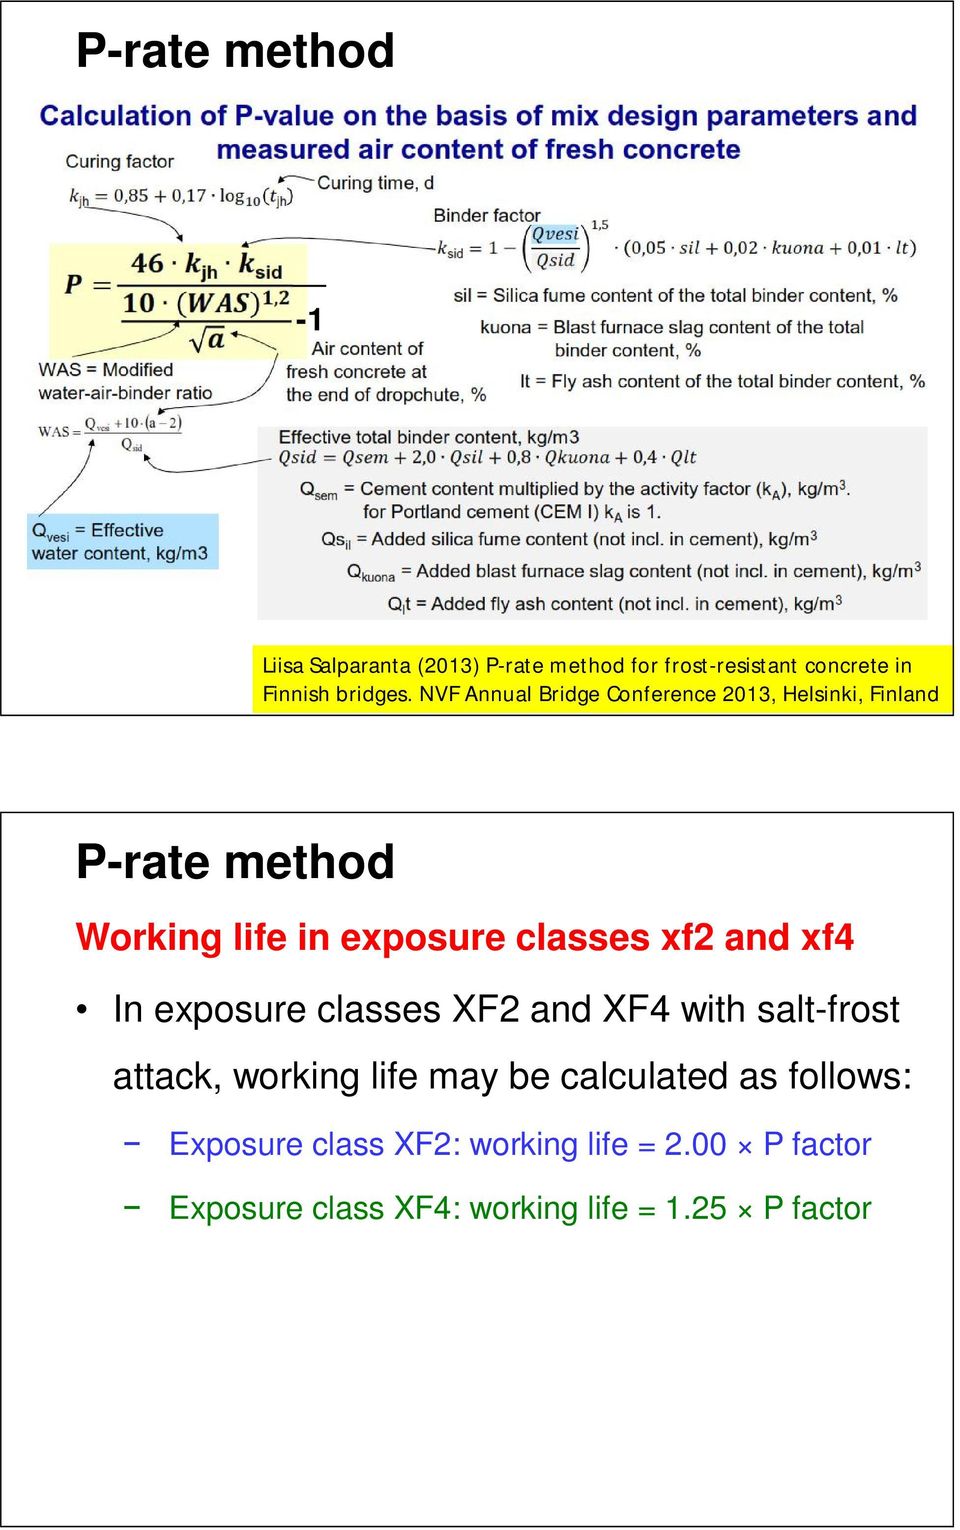 xf2 and xf4 In exposure classes XF2 and XF4 with salt-frost attack, working life may be calculated as